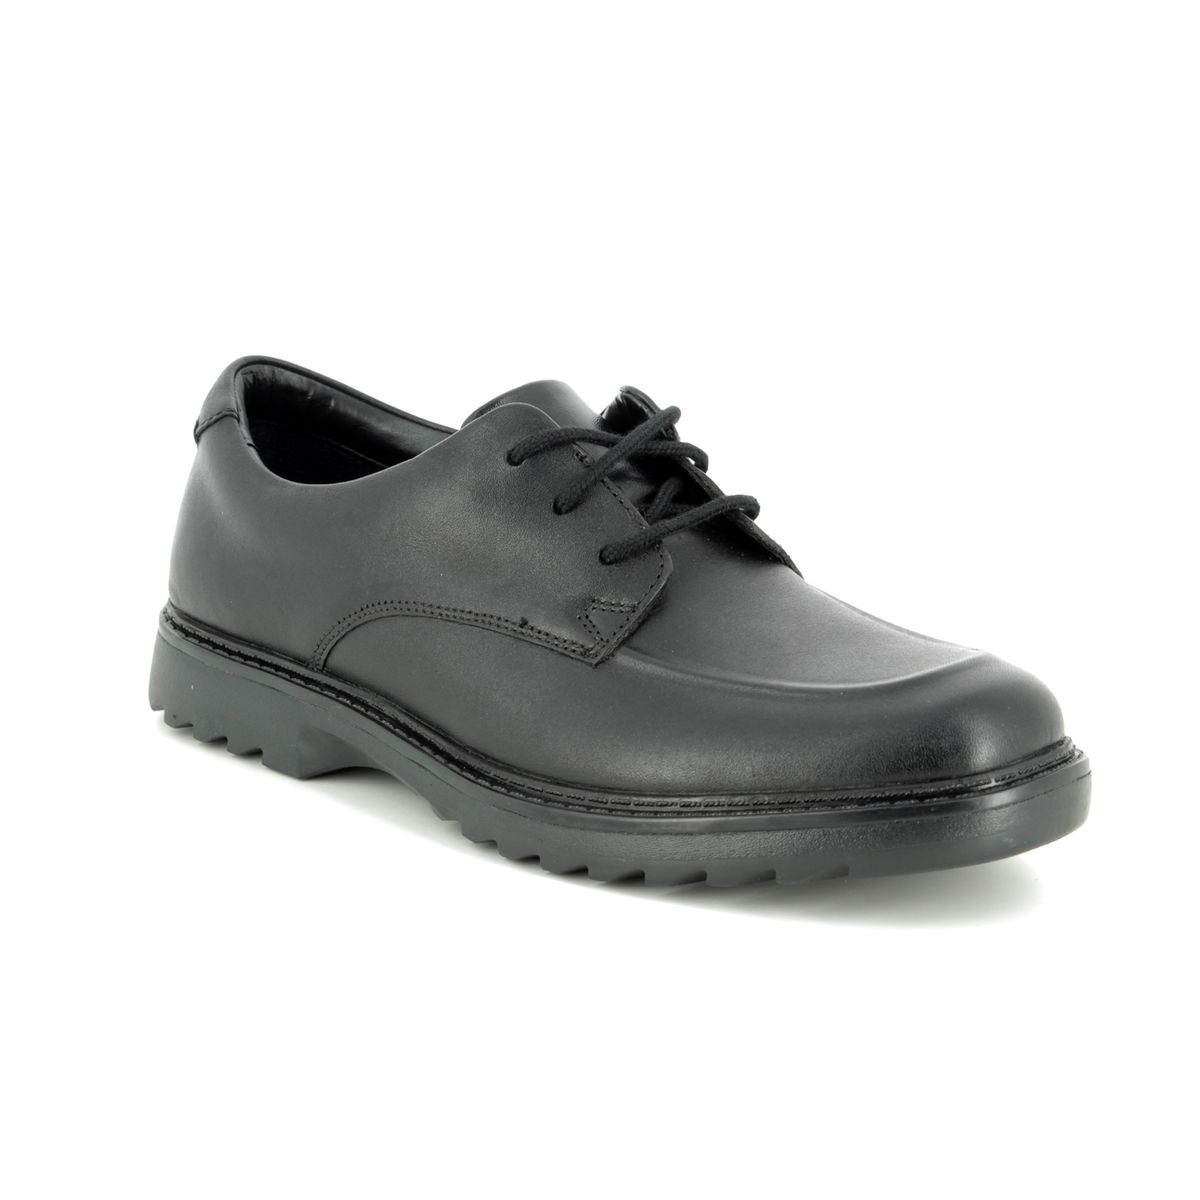 clarks asher grove shoes off 63 